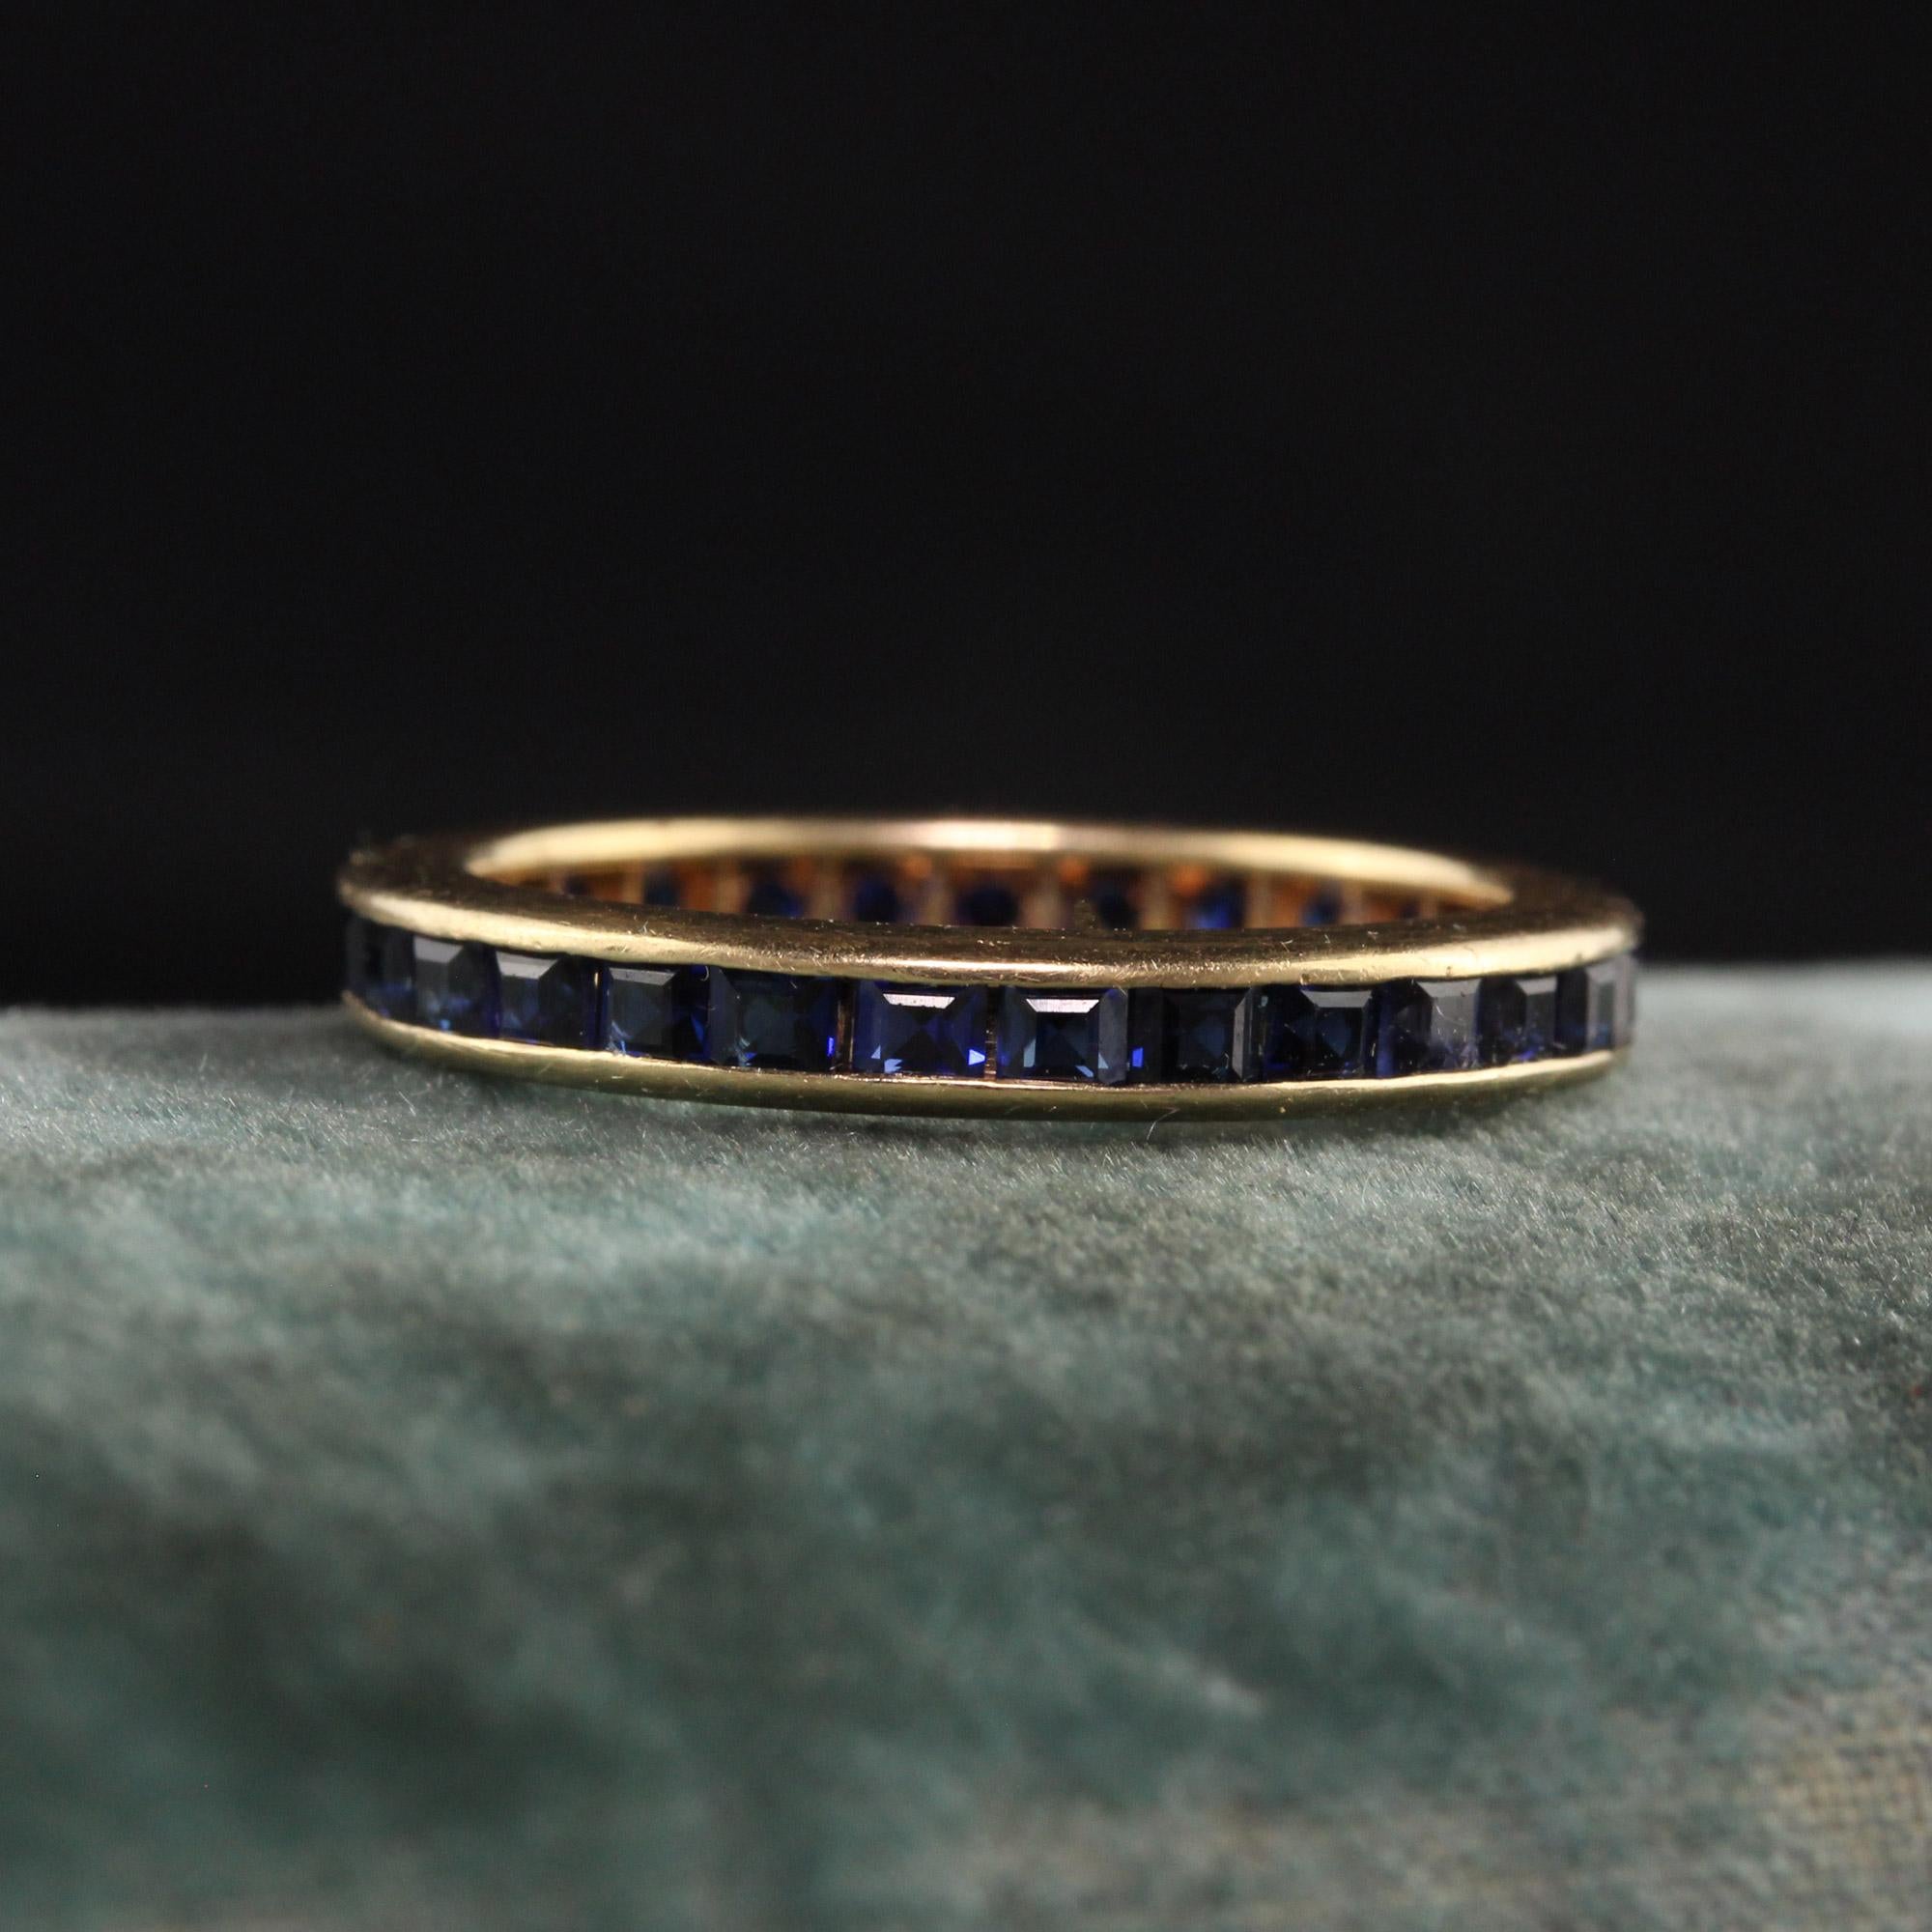 Beautiful Estate Retro 14K Yellow Gold Square Natural Sapphire Eternity Band. This gorgeous eternity band is craftd in 14k yellow gold. It has square cut sapphires going around the entire ring and is in good condition.

Item #R1261

Metal: 14K